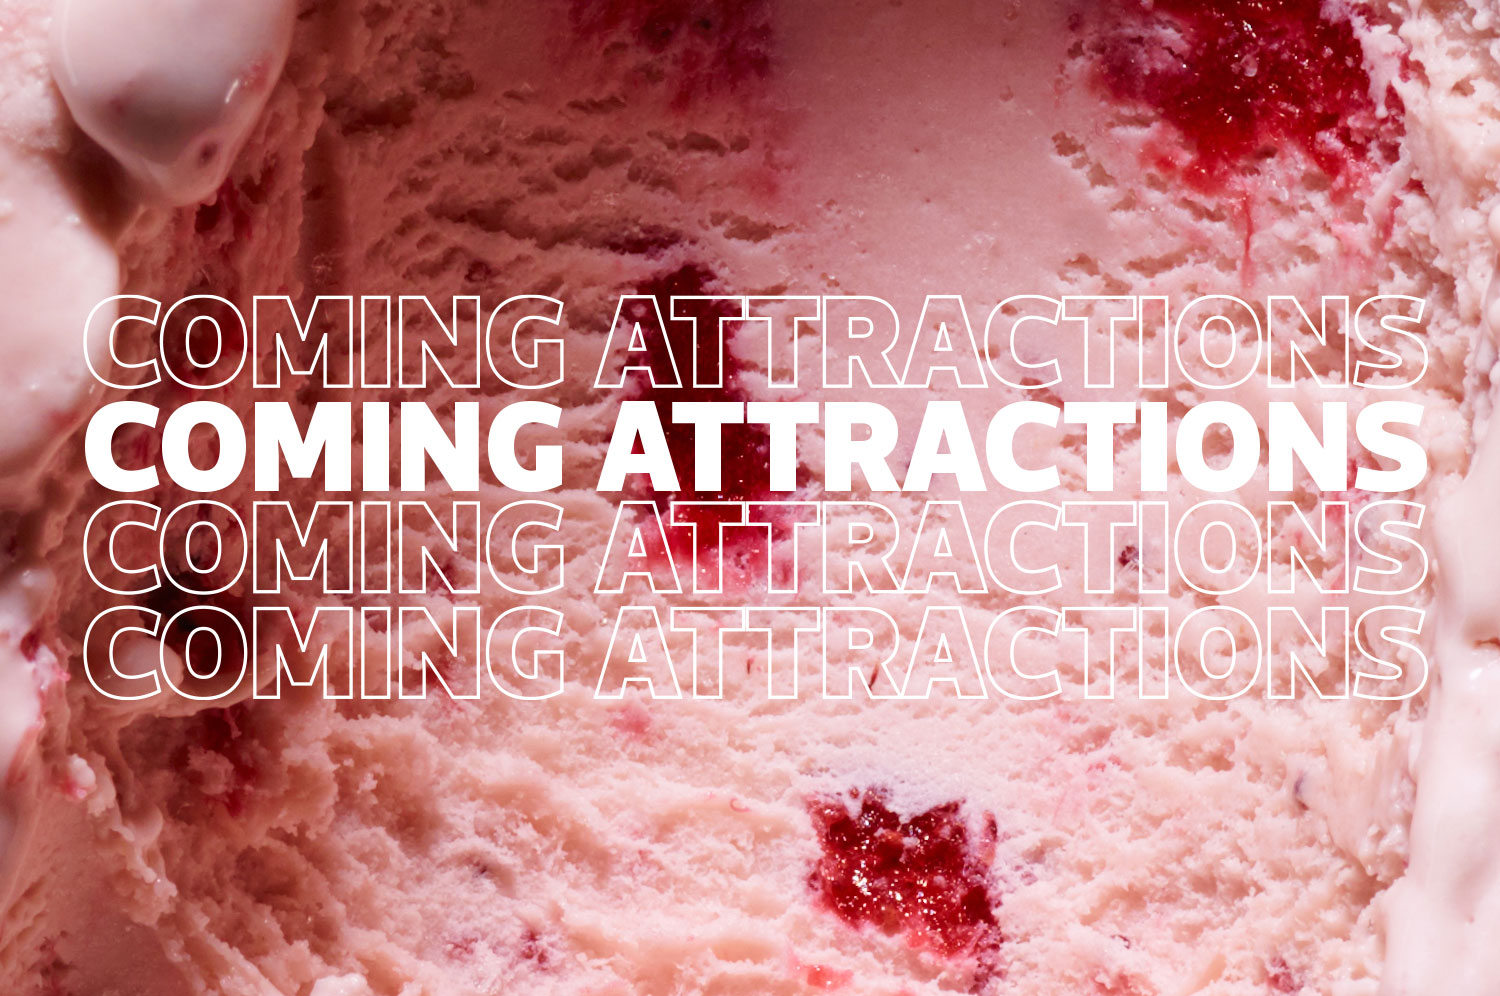 A close-up of pink ice cream with red fruit in it. The words “Coming Attractions” are overlaid on the image.